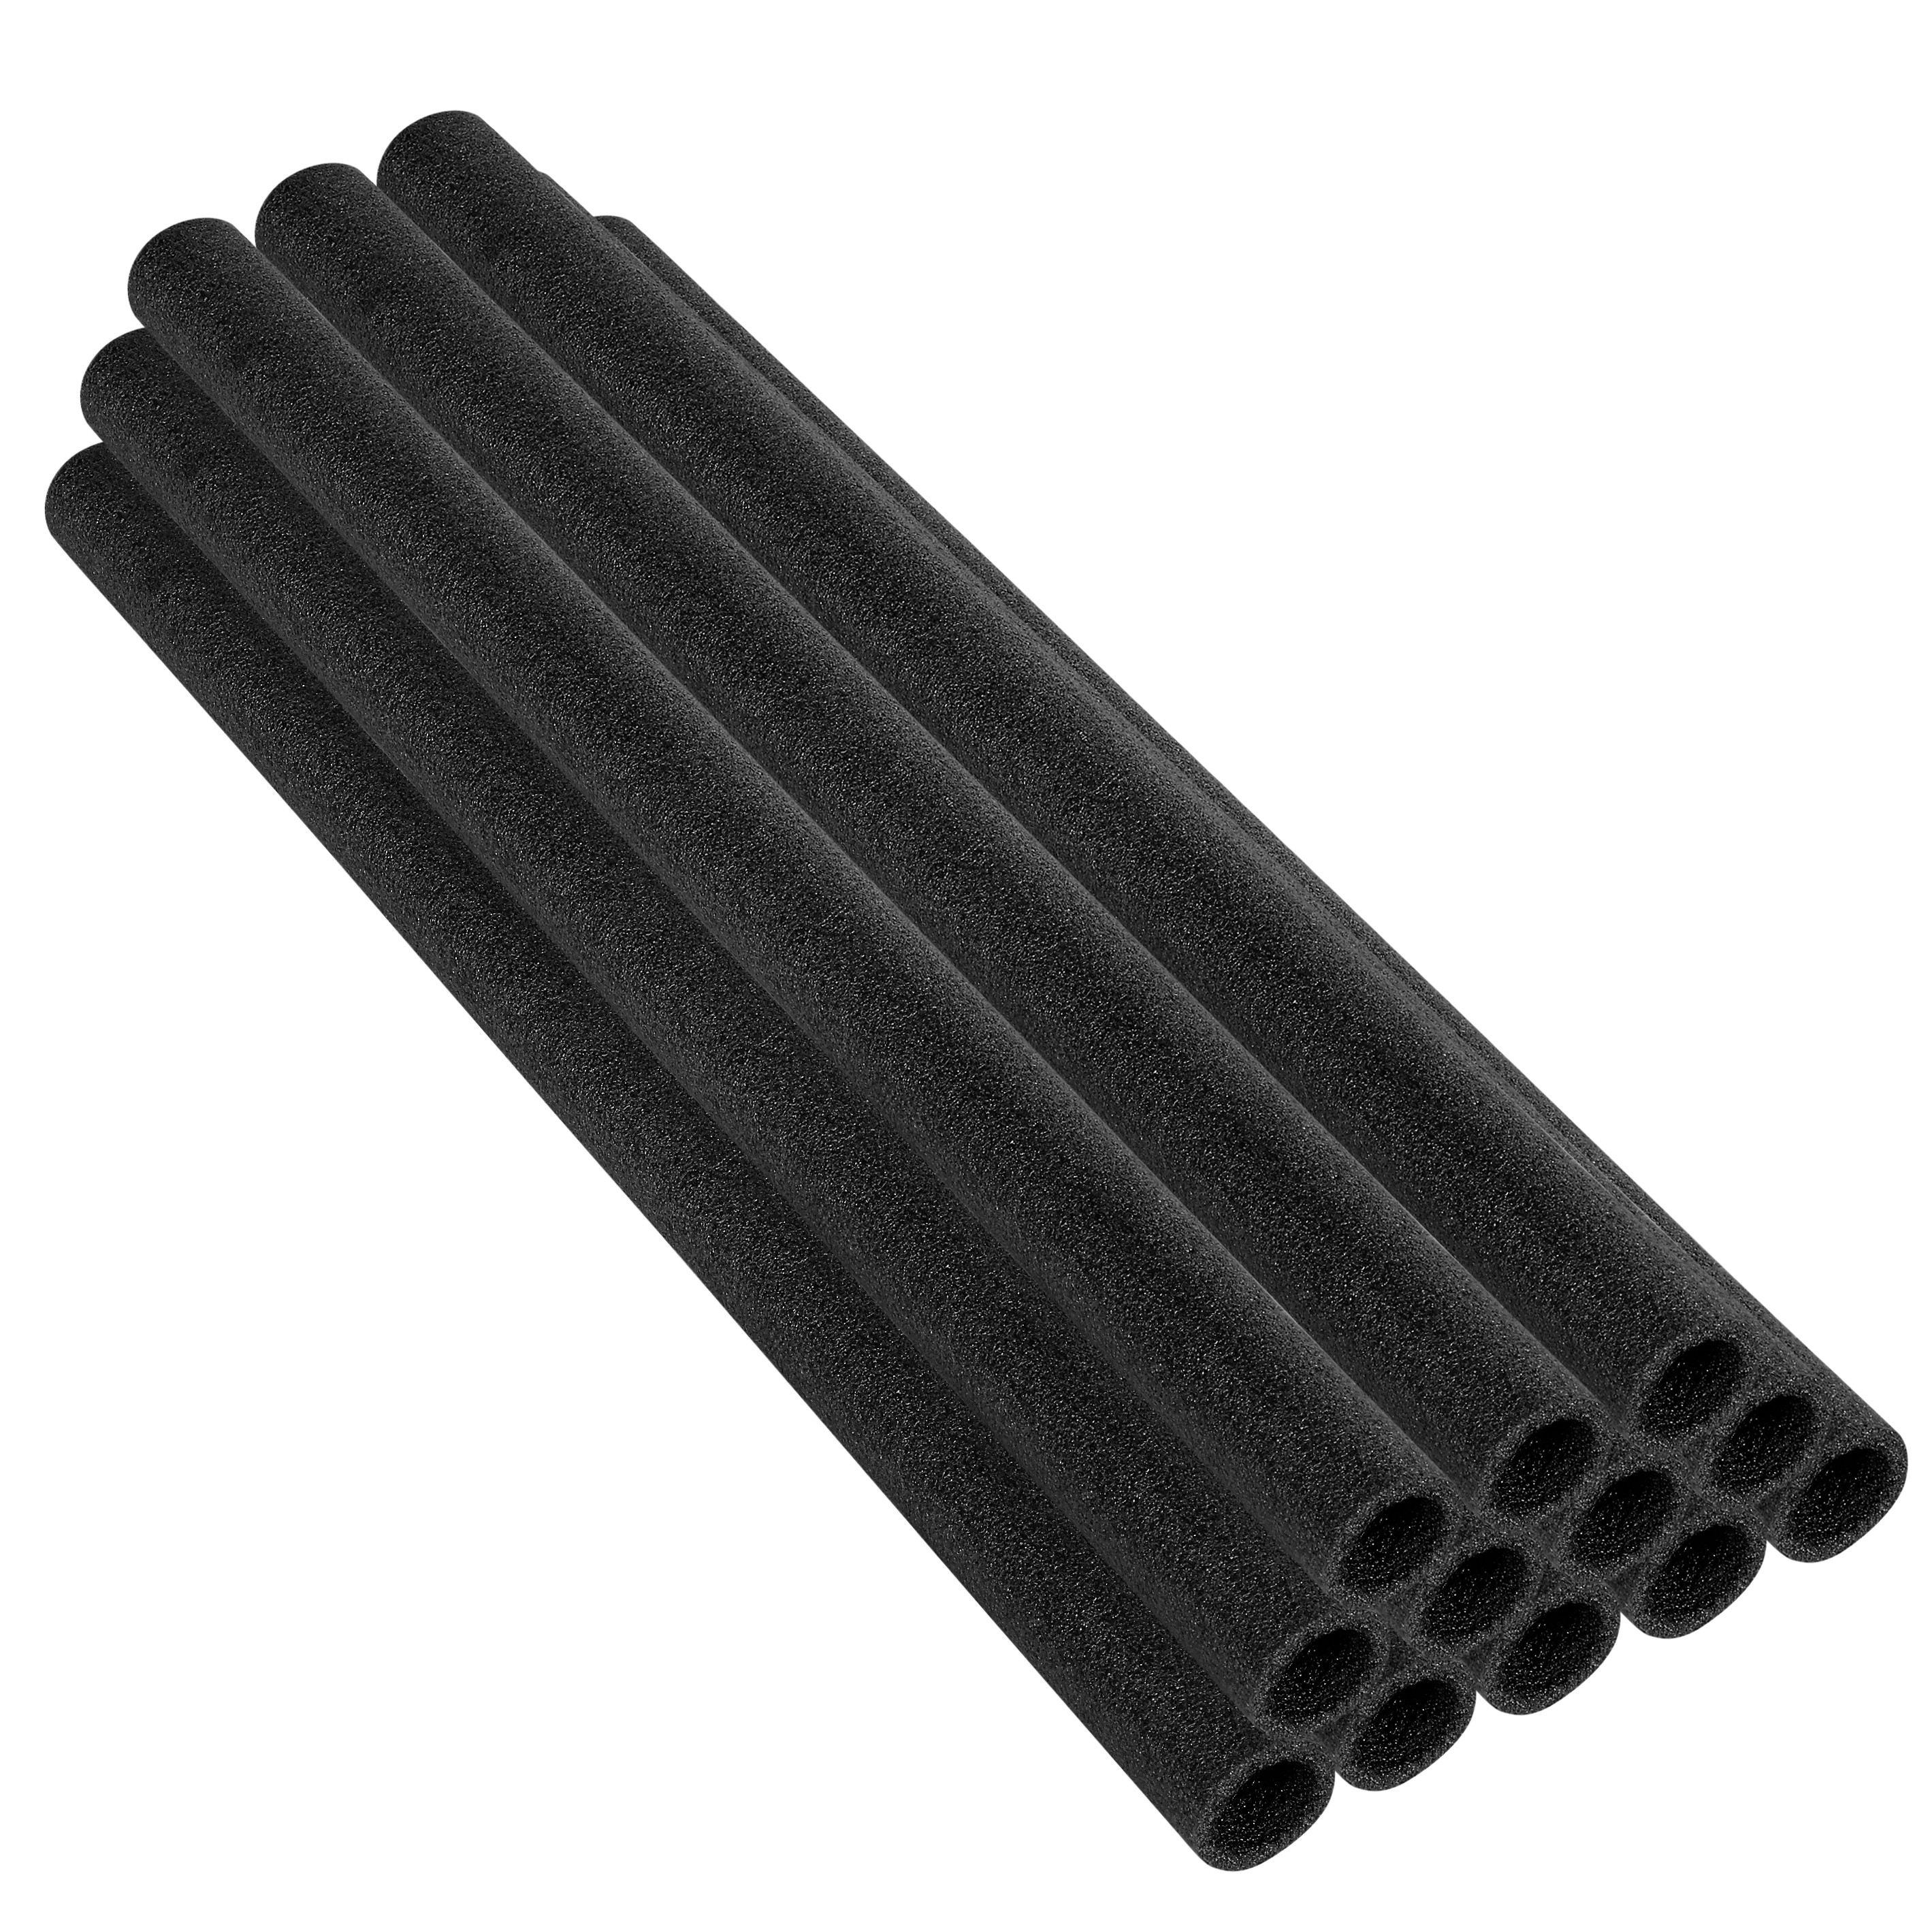 33 Inch 84cm Trampoline Foam Sleeves for 1" Diameter Pole | Replacement Sponge Padding for 6 Poles | Set of 12 - Black